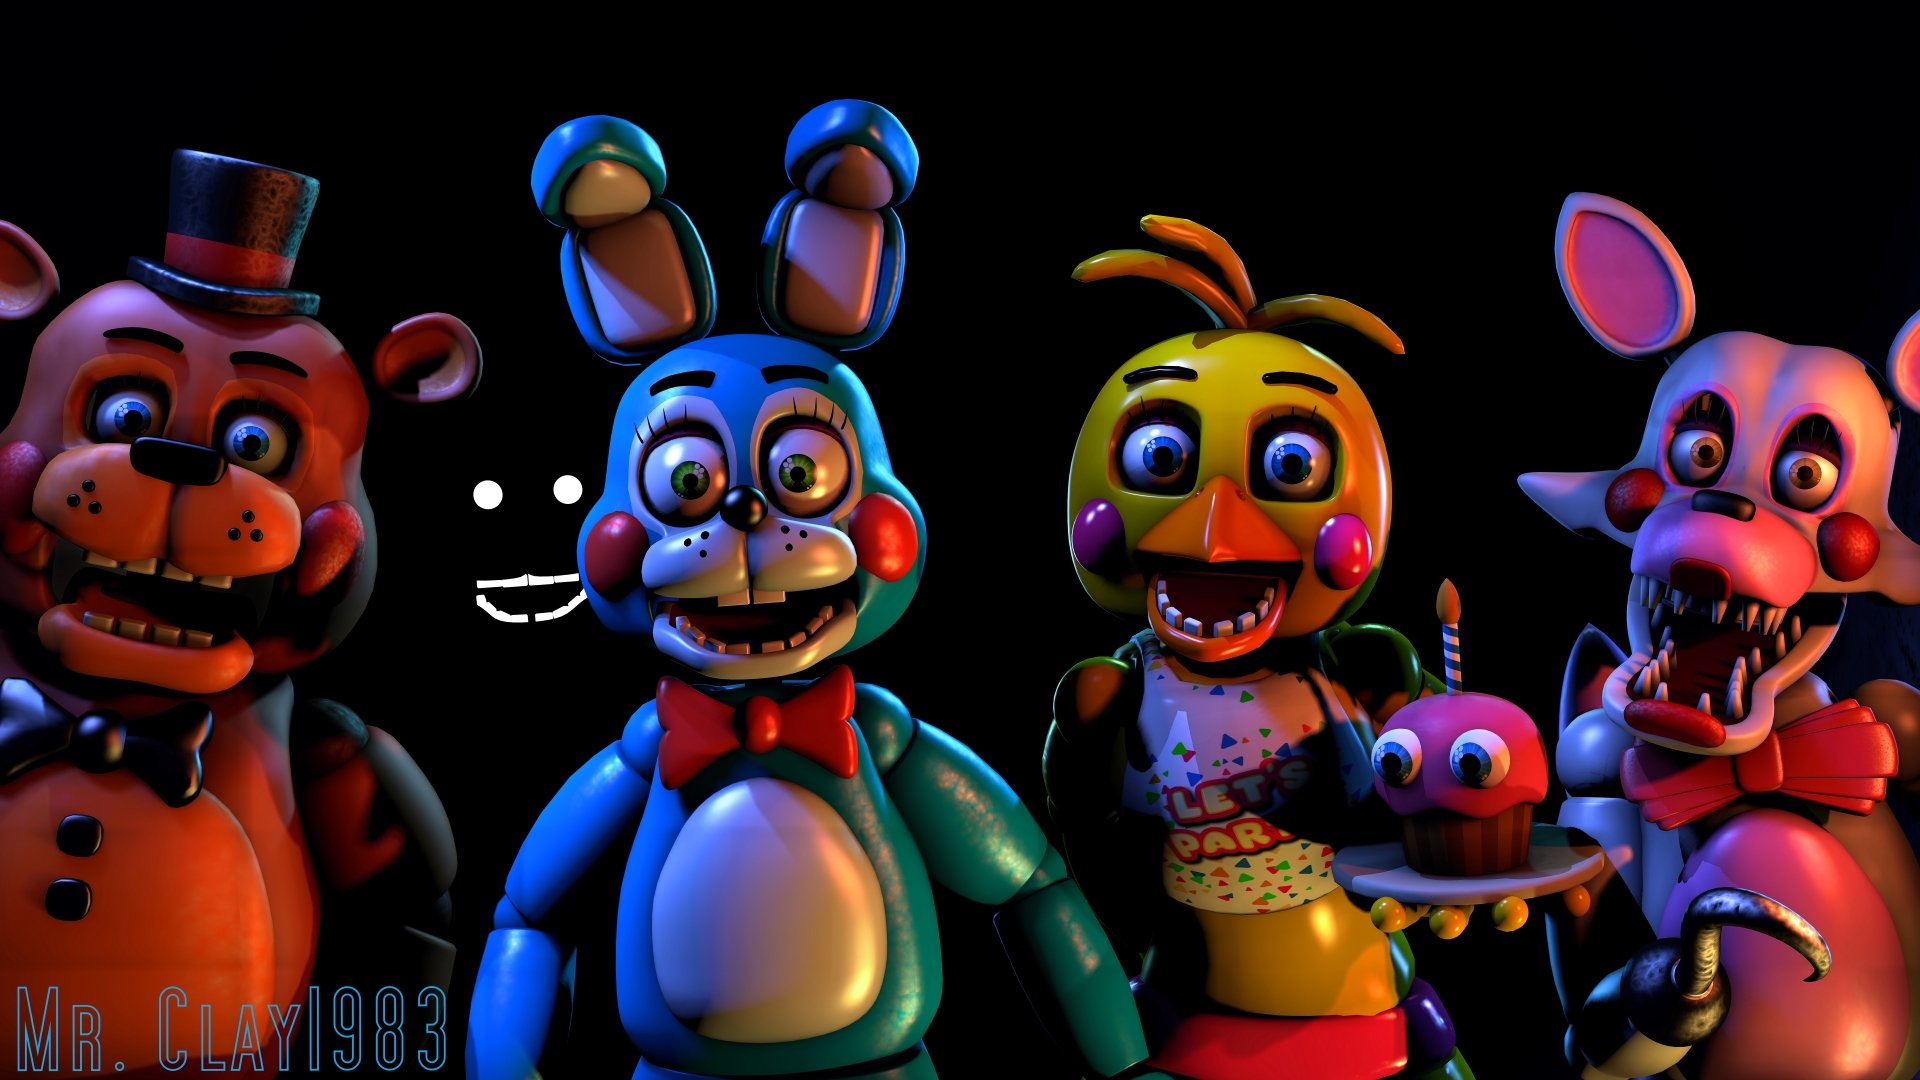 free download five nights at freddys 2